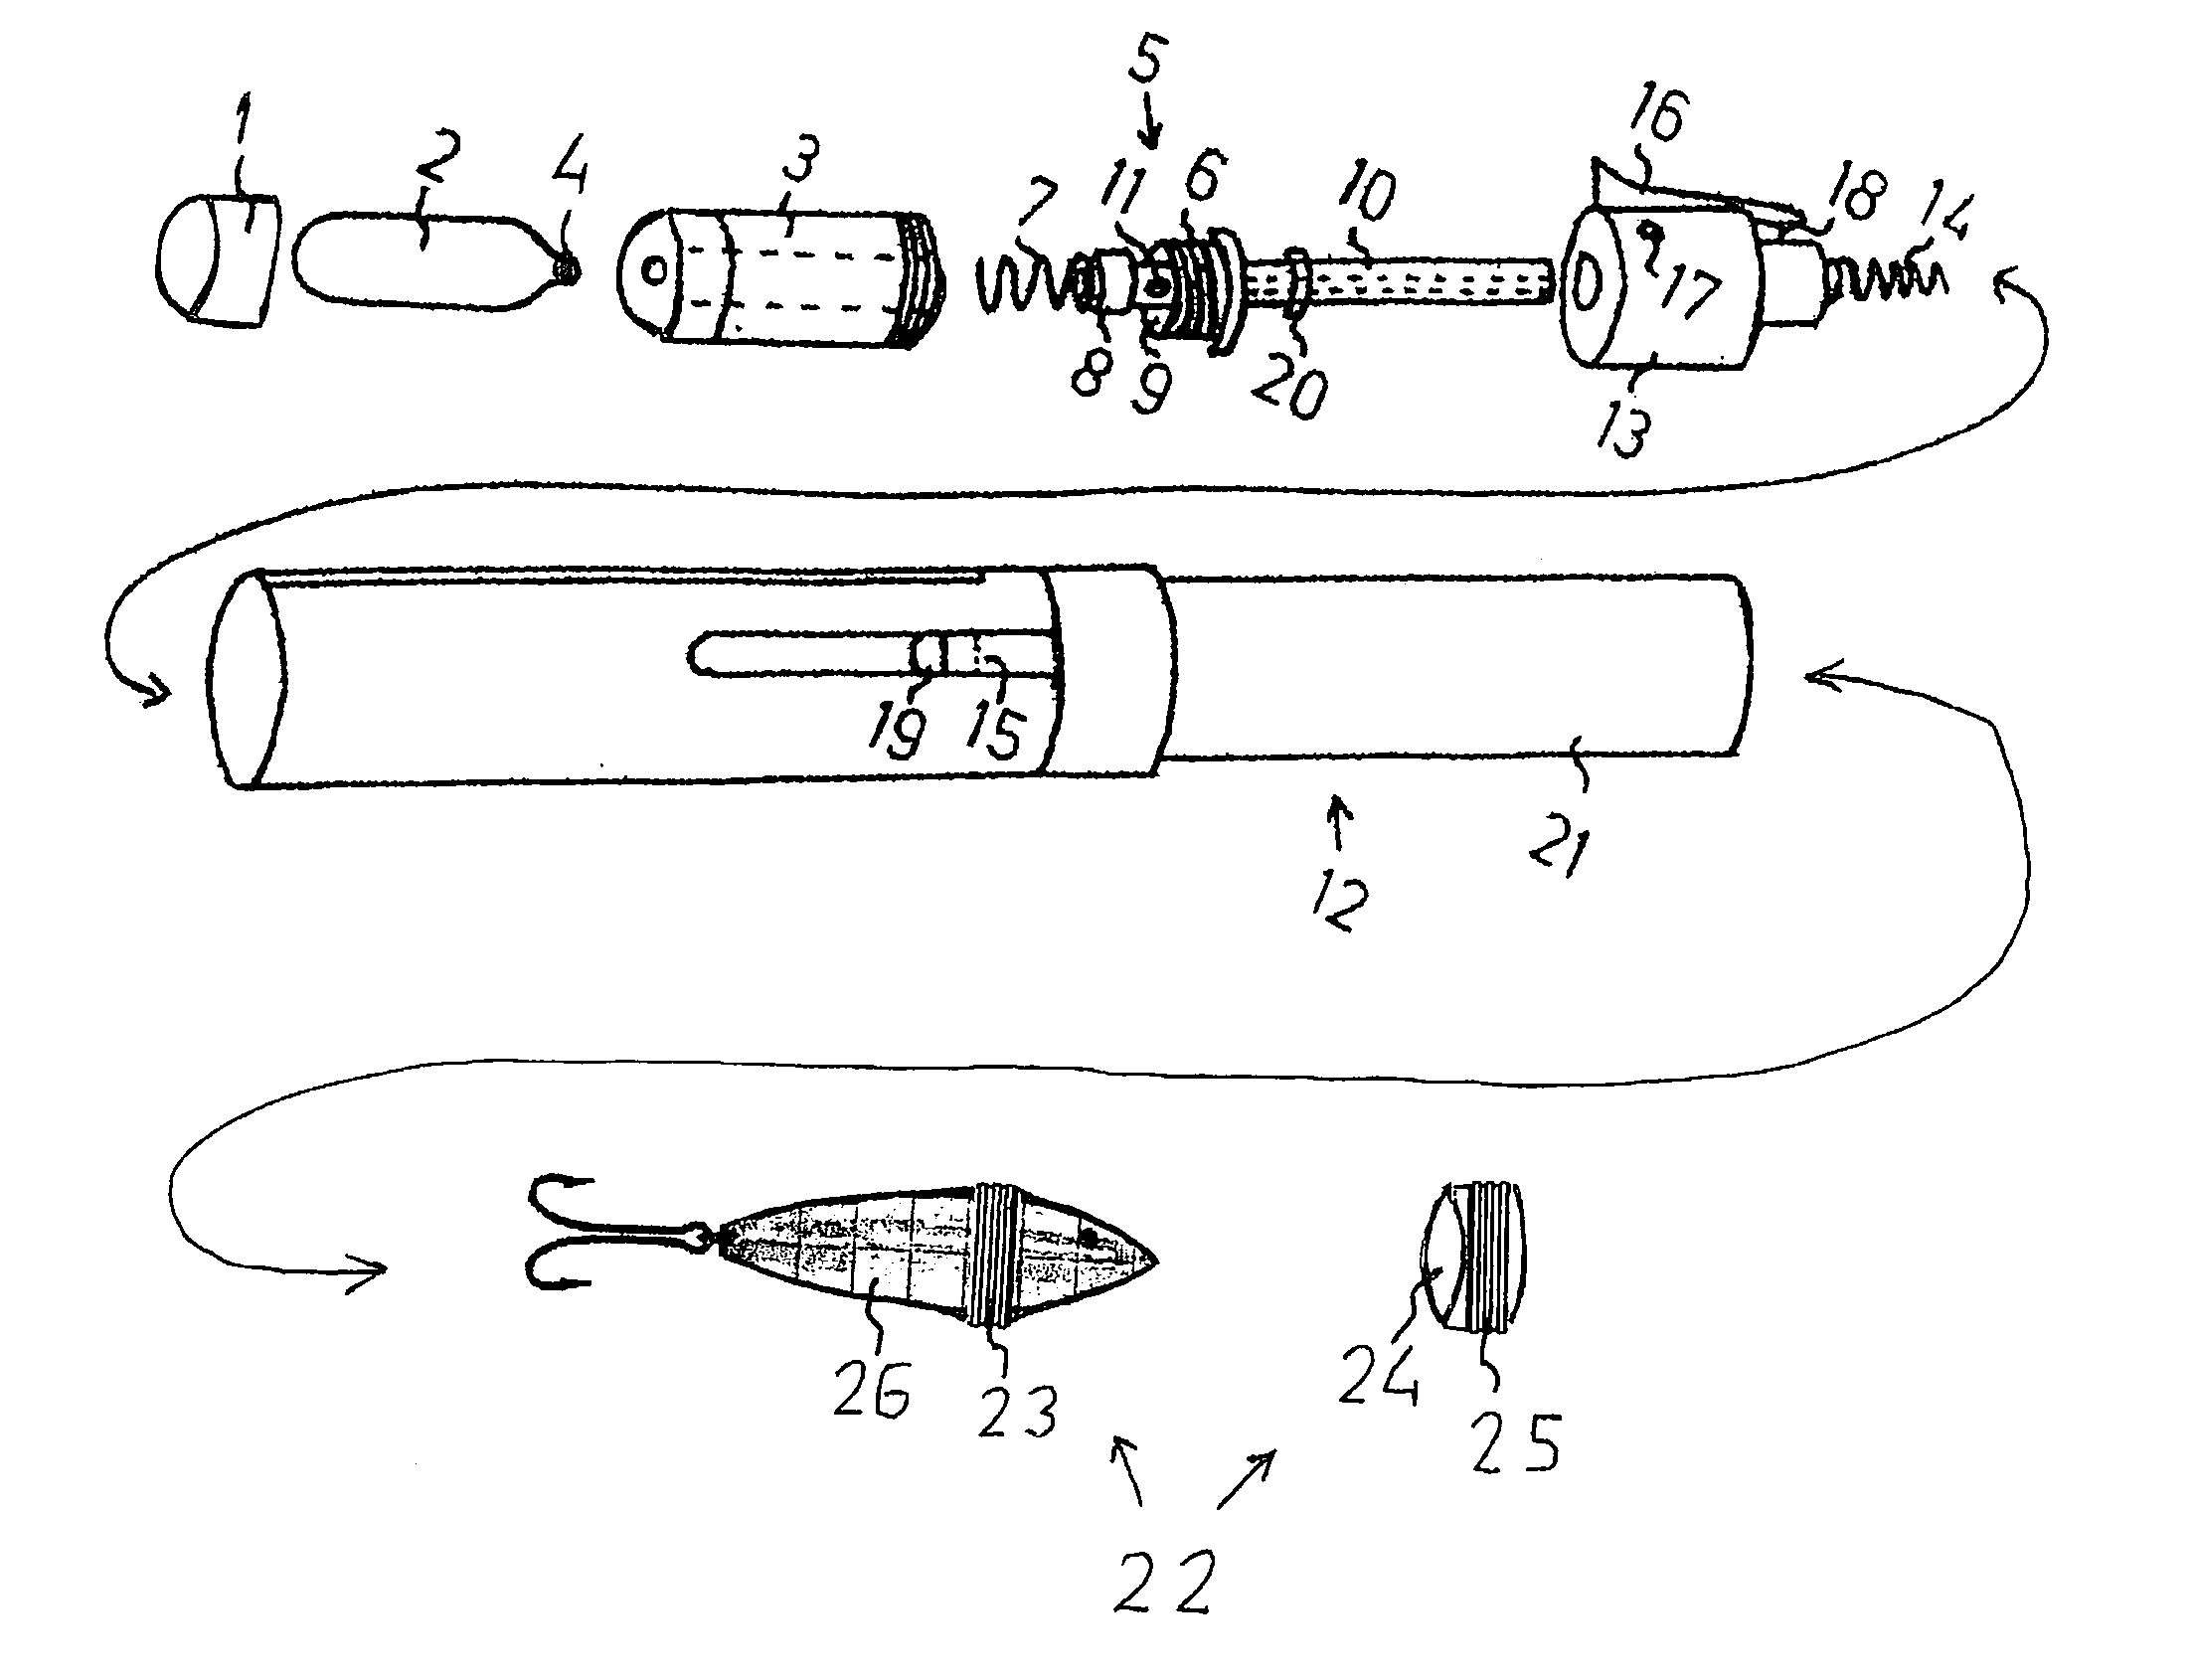 Device for fishing object ejection